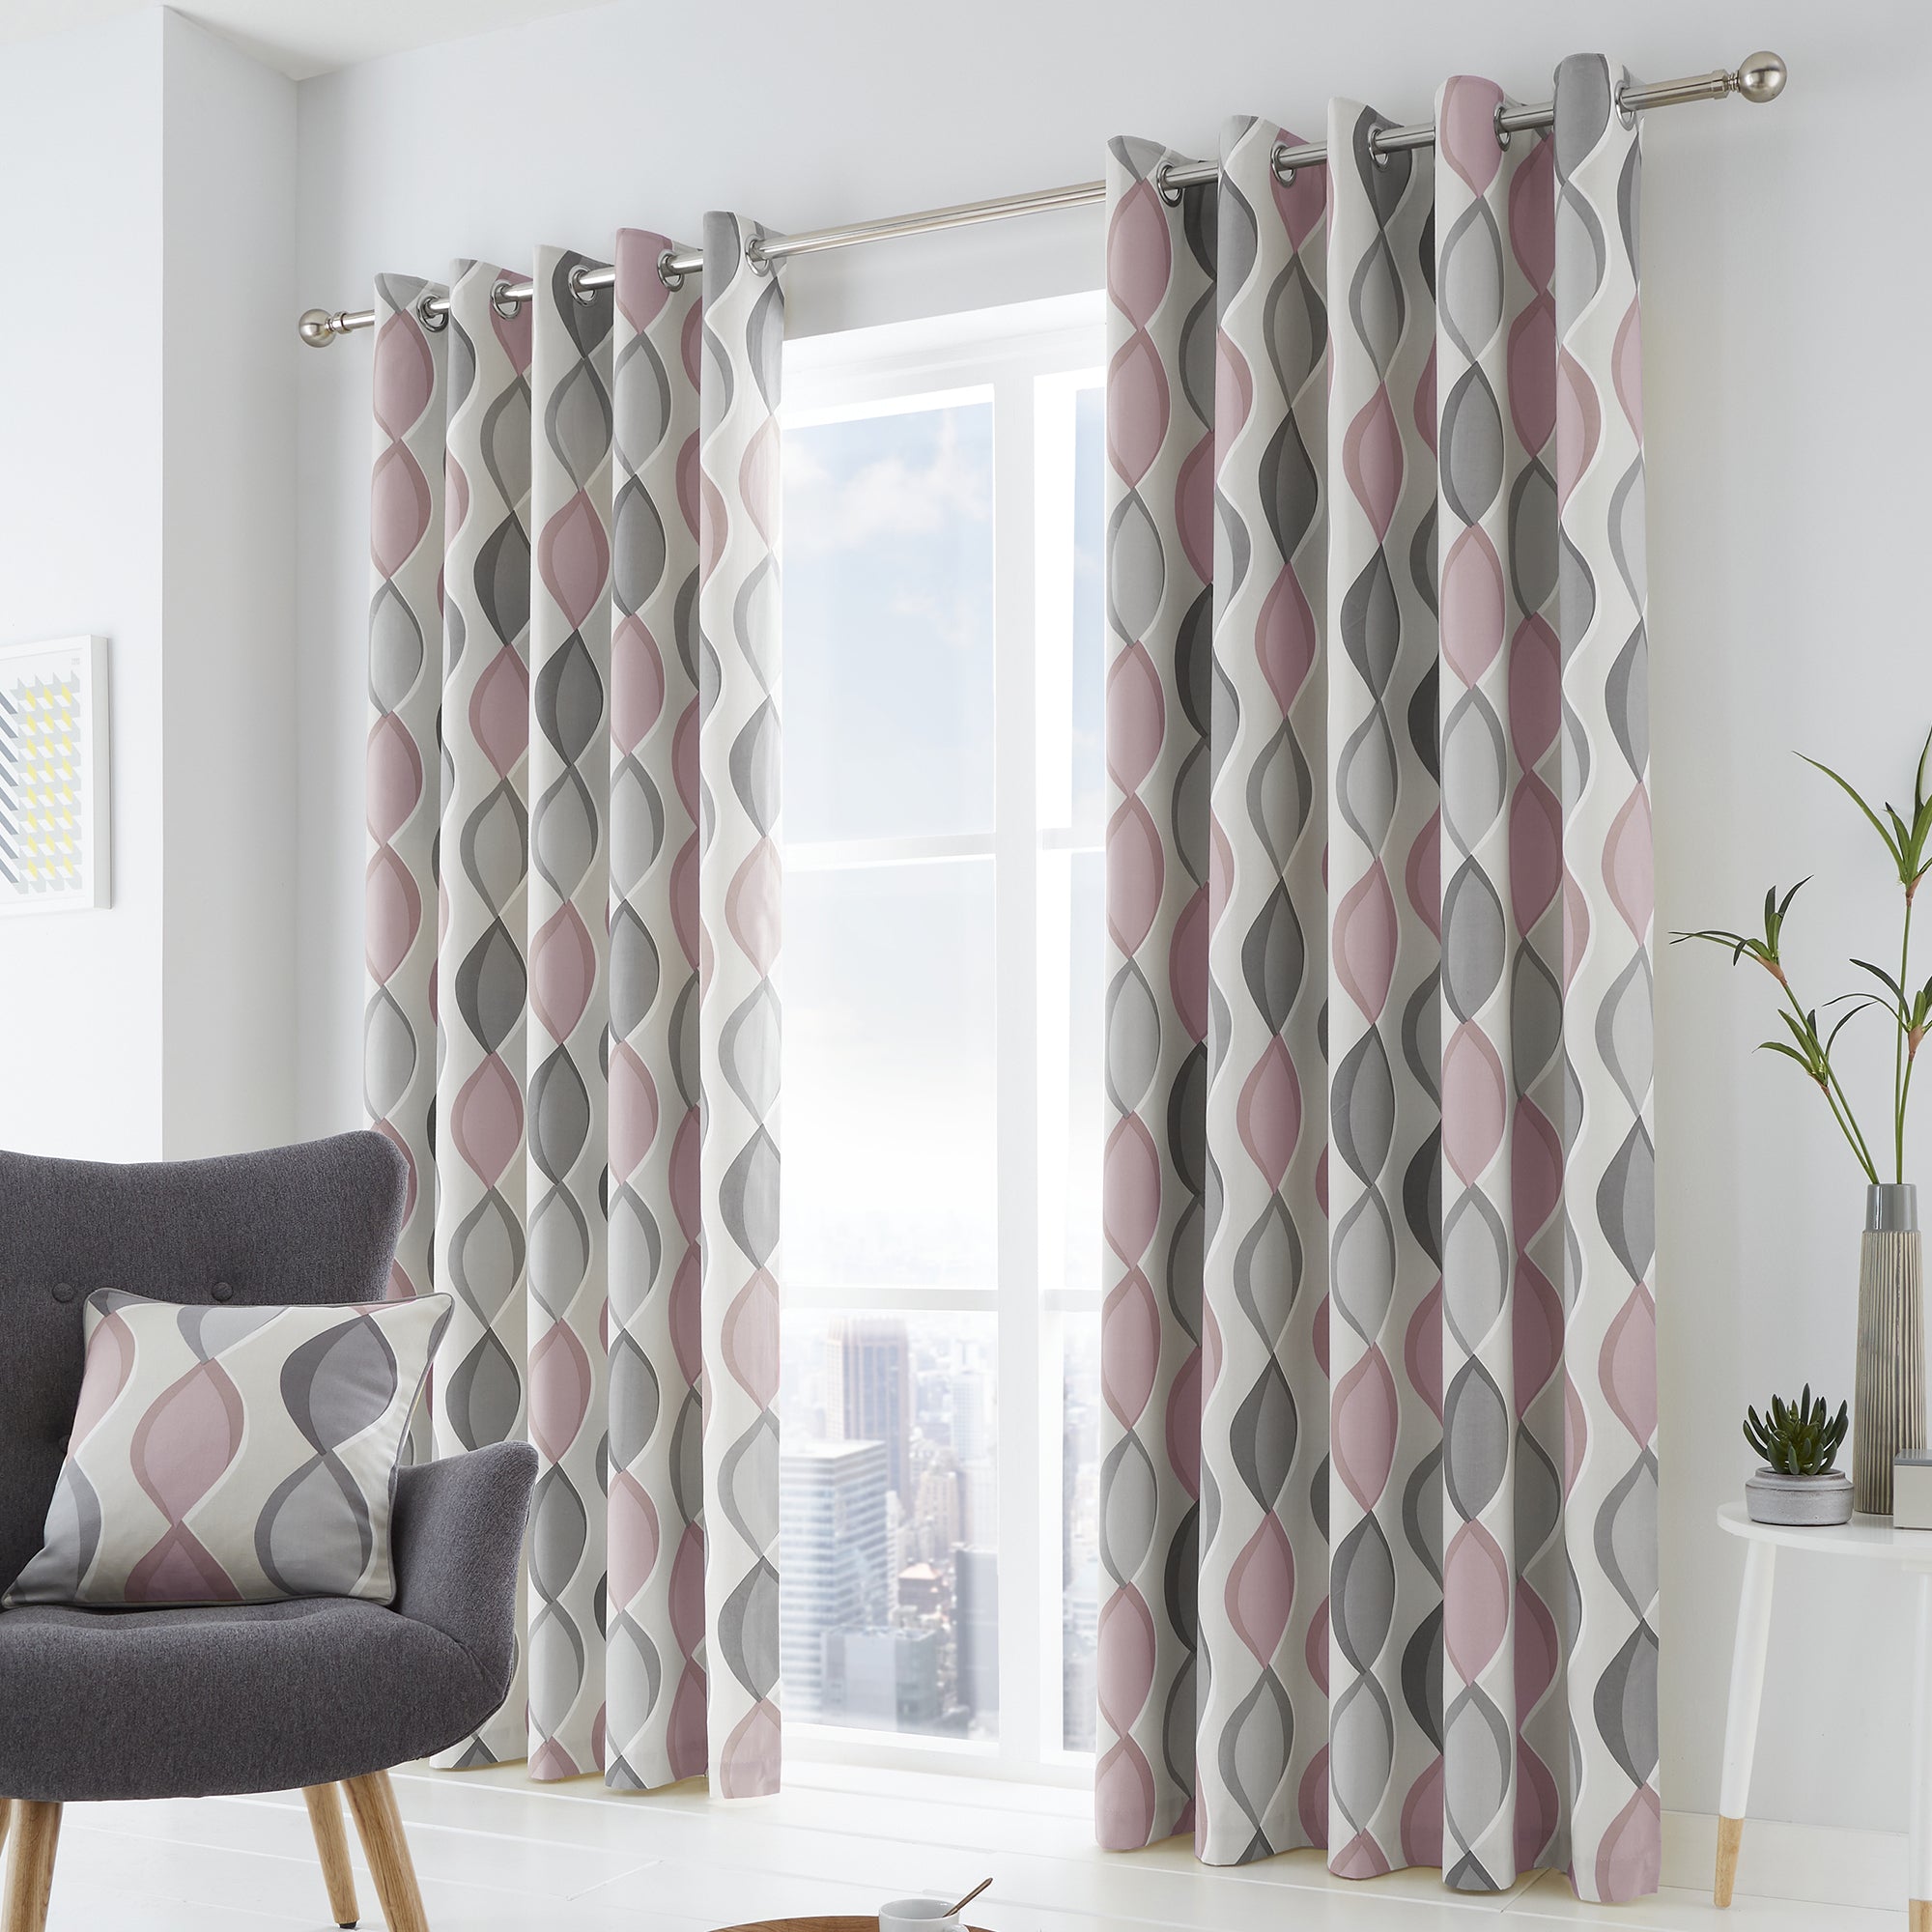 Lennox - 100% Cotton Lined Eyelet Curtains in Blush - by Fusion